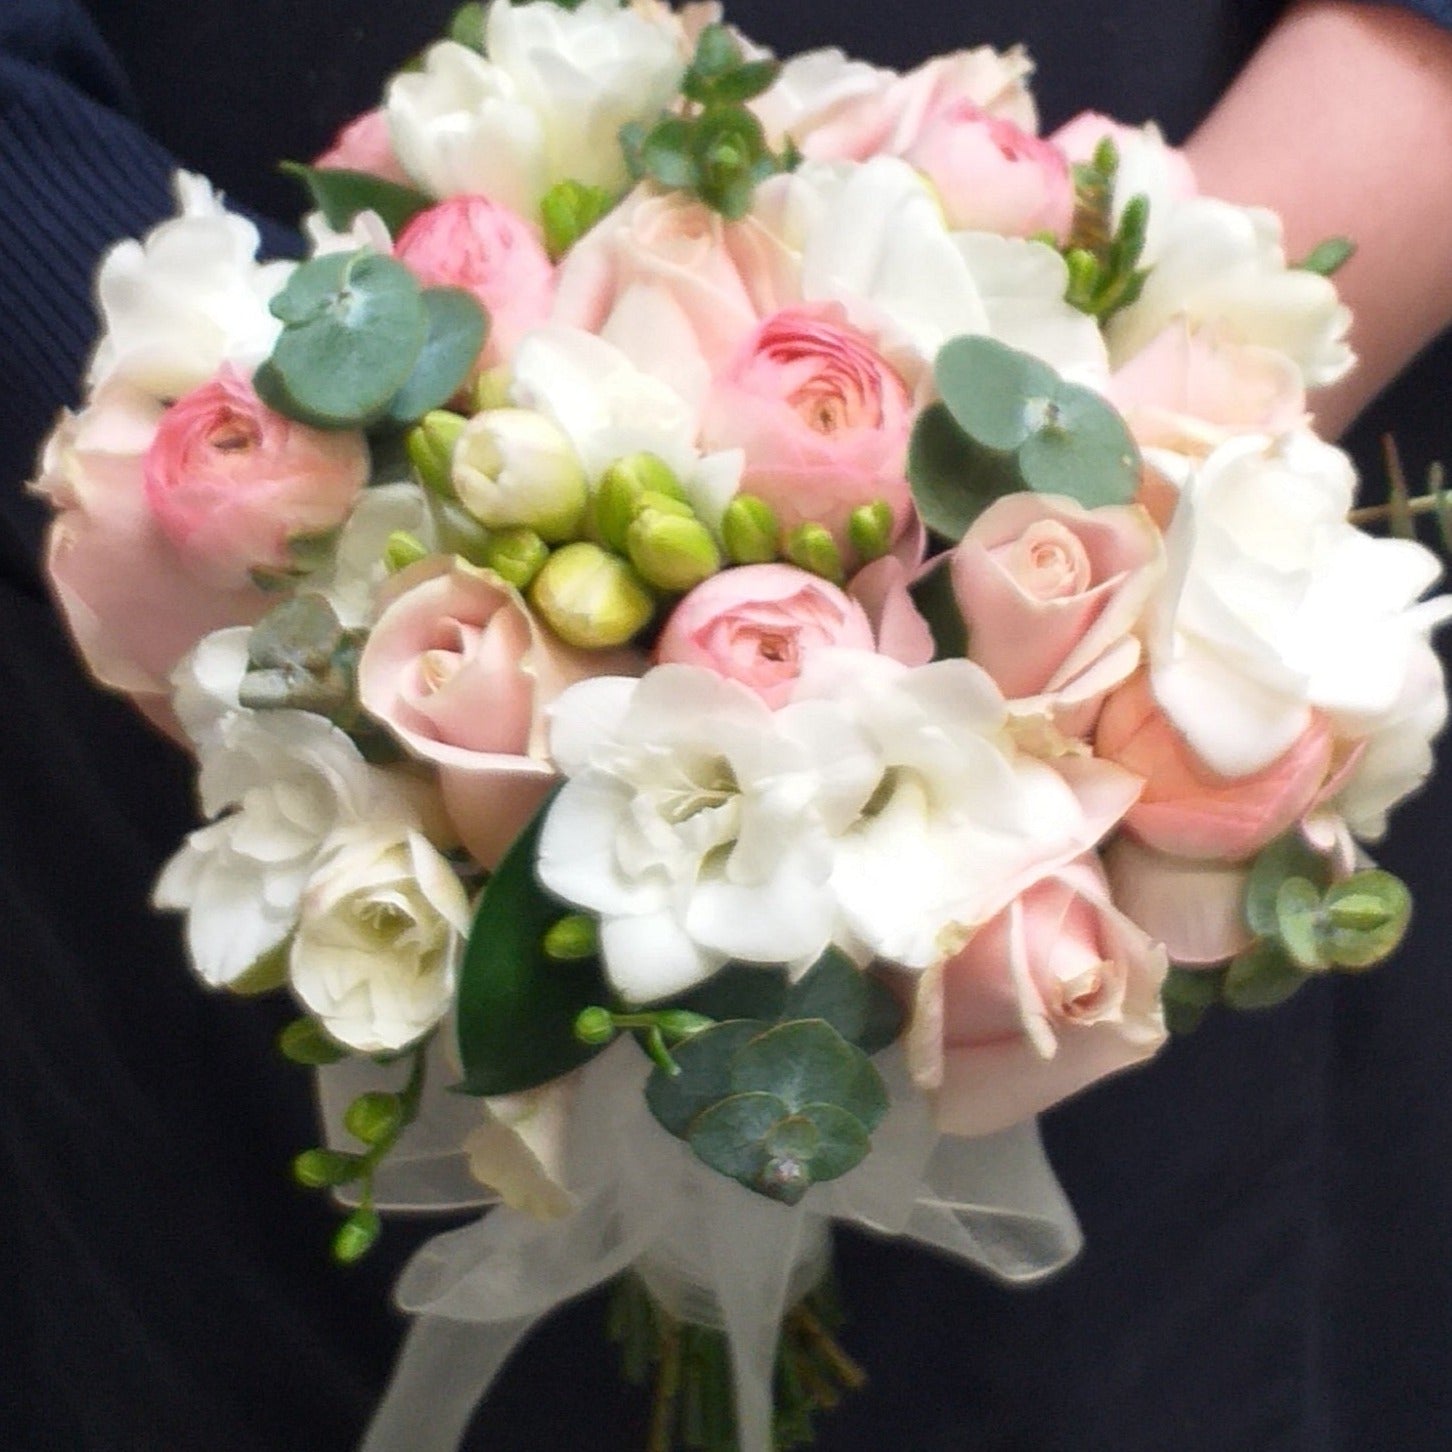 Bridal bouquet of white freesias, pink roses, pink ranunculus and baby blue gum